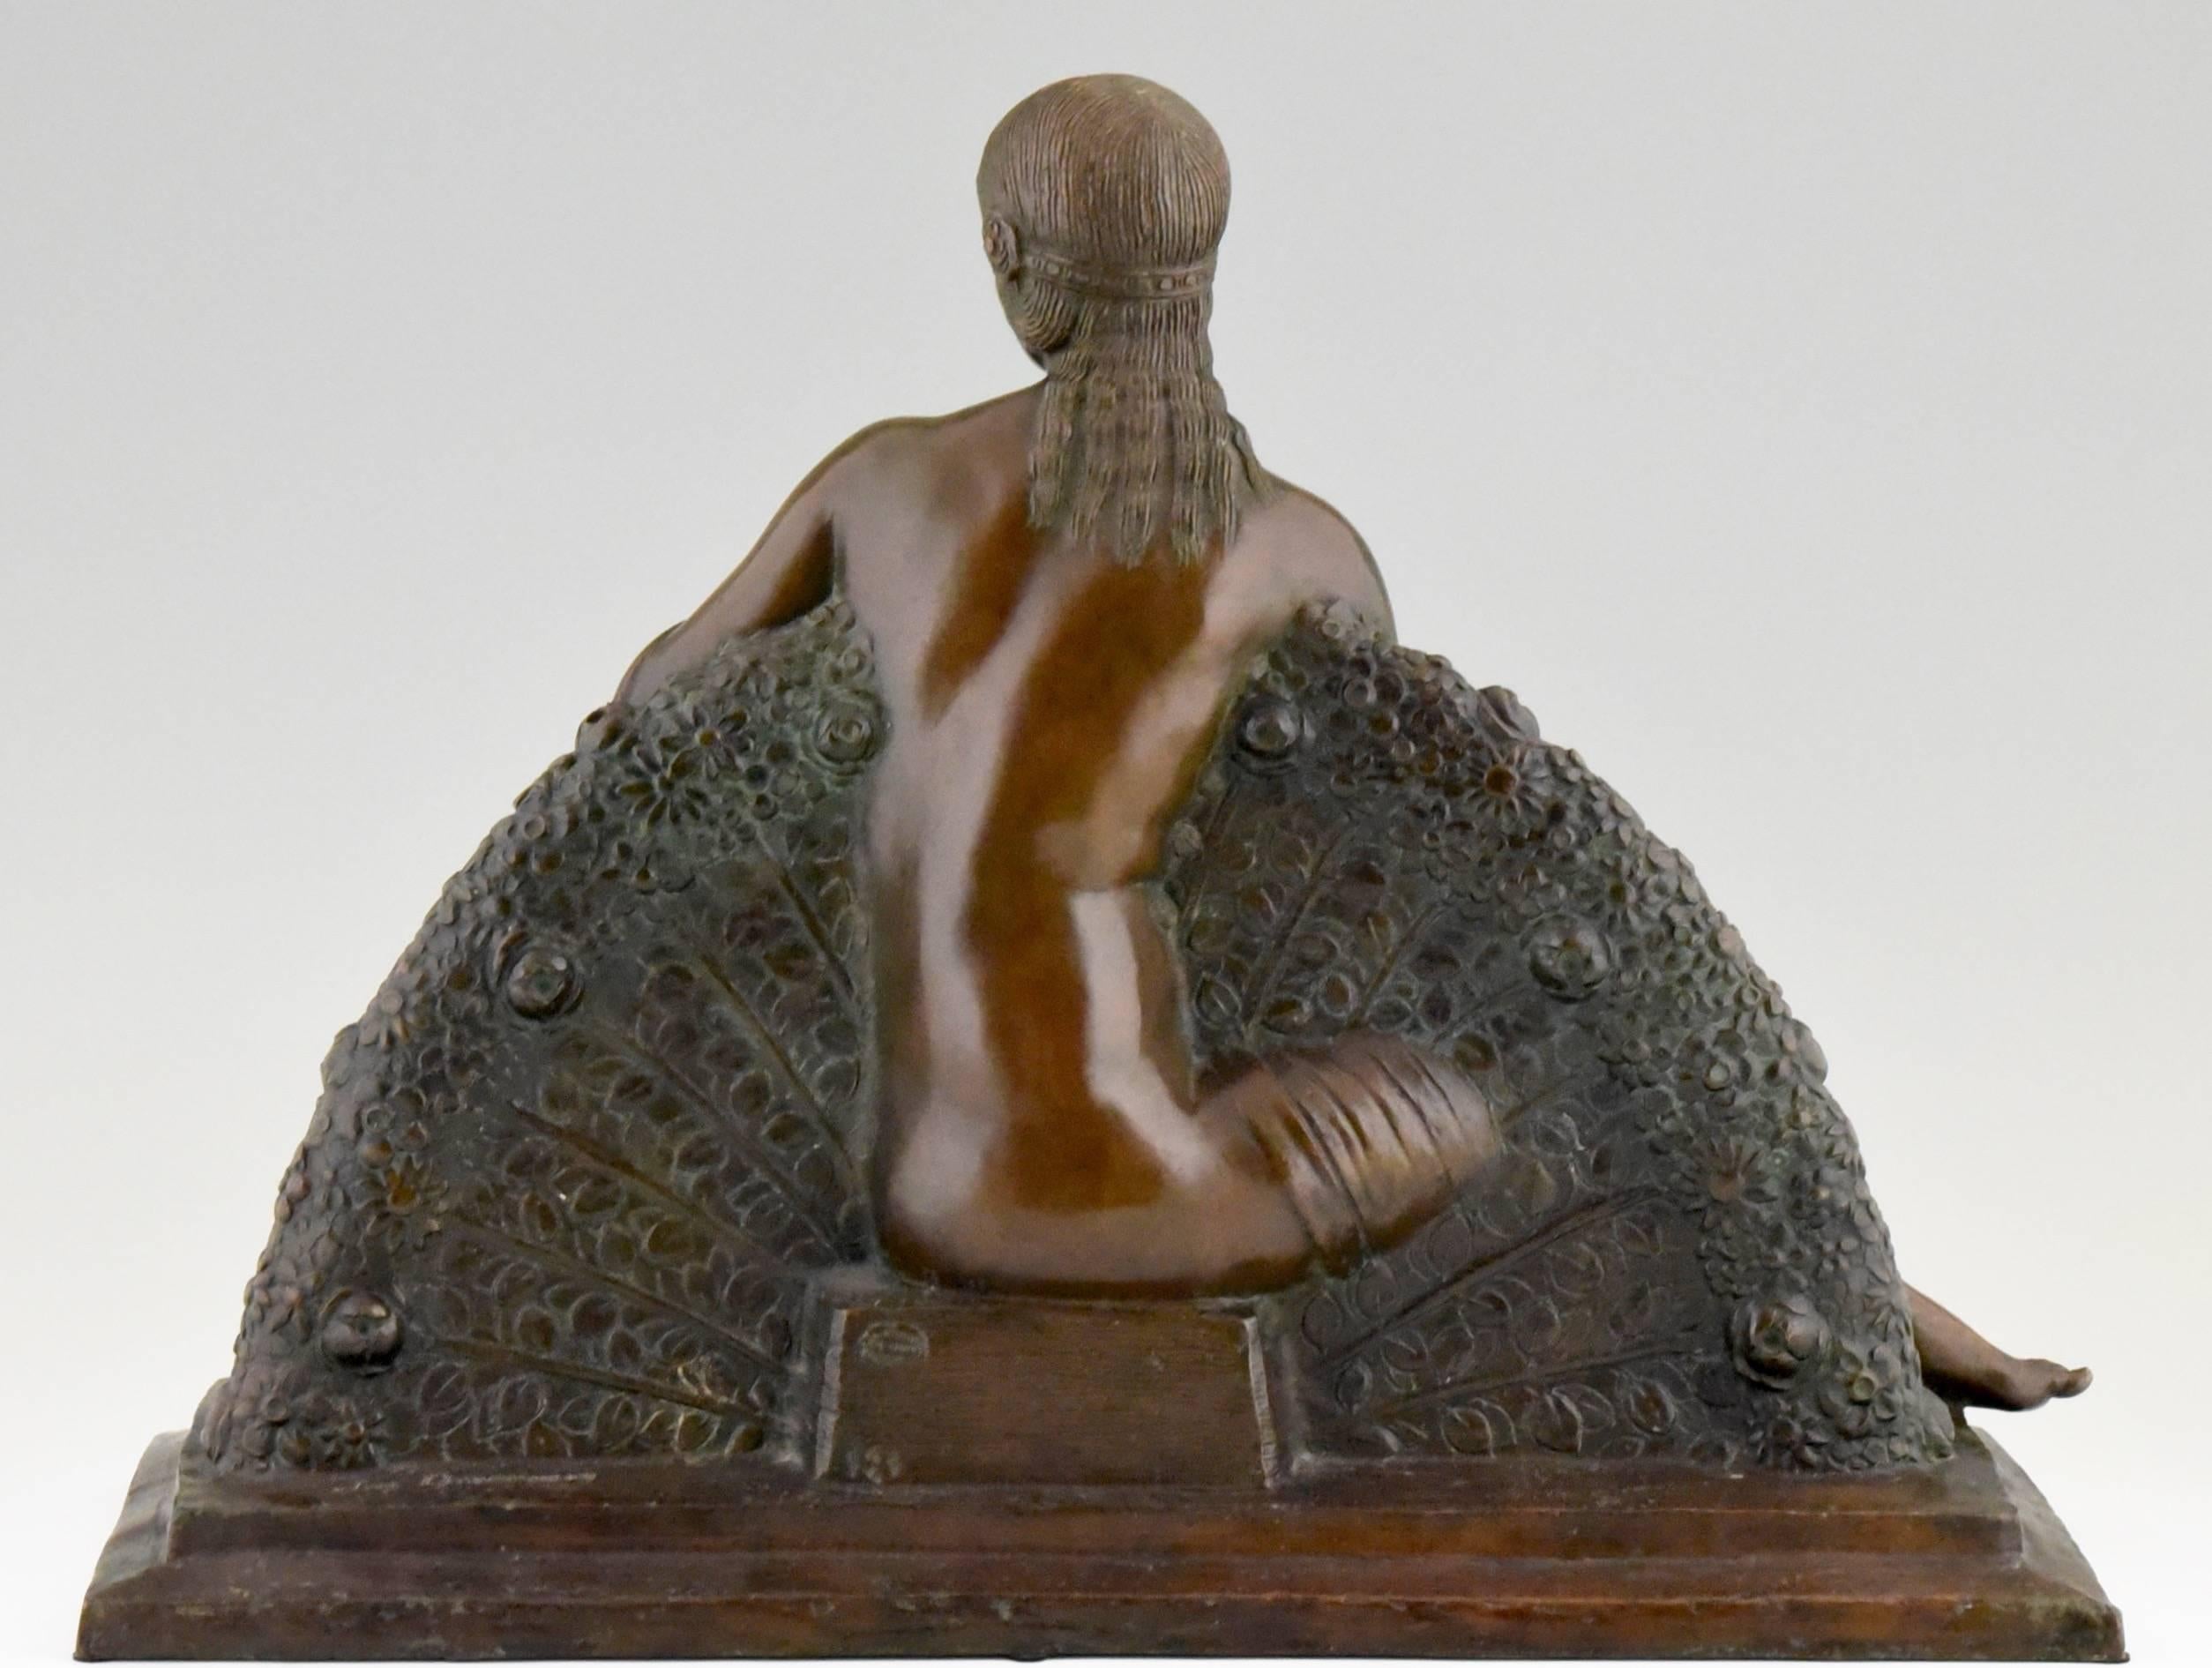 Bronze Art Deco Sculpture of a Seated Nude by Joe Descomps, Etling Foundry France 1925